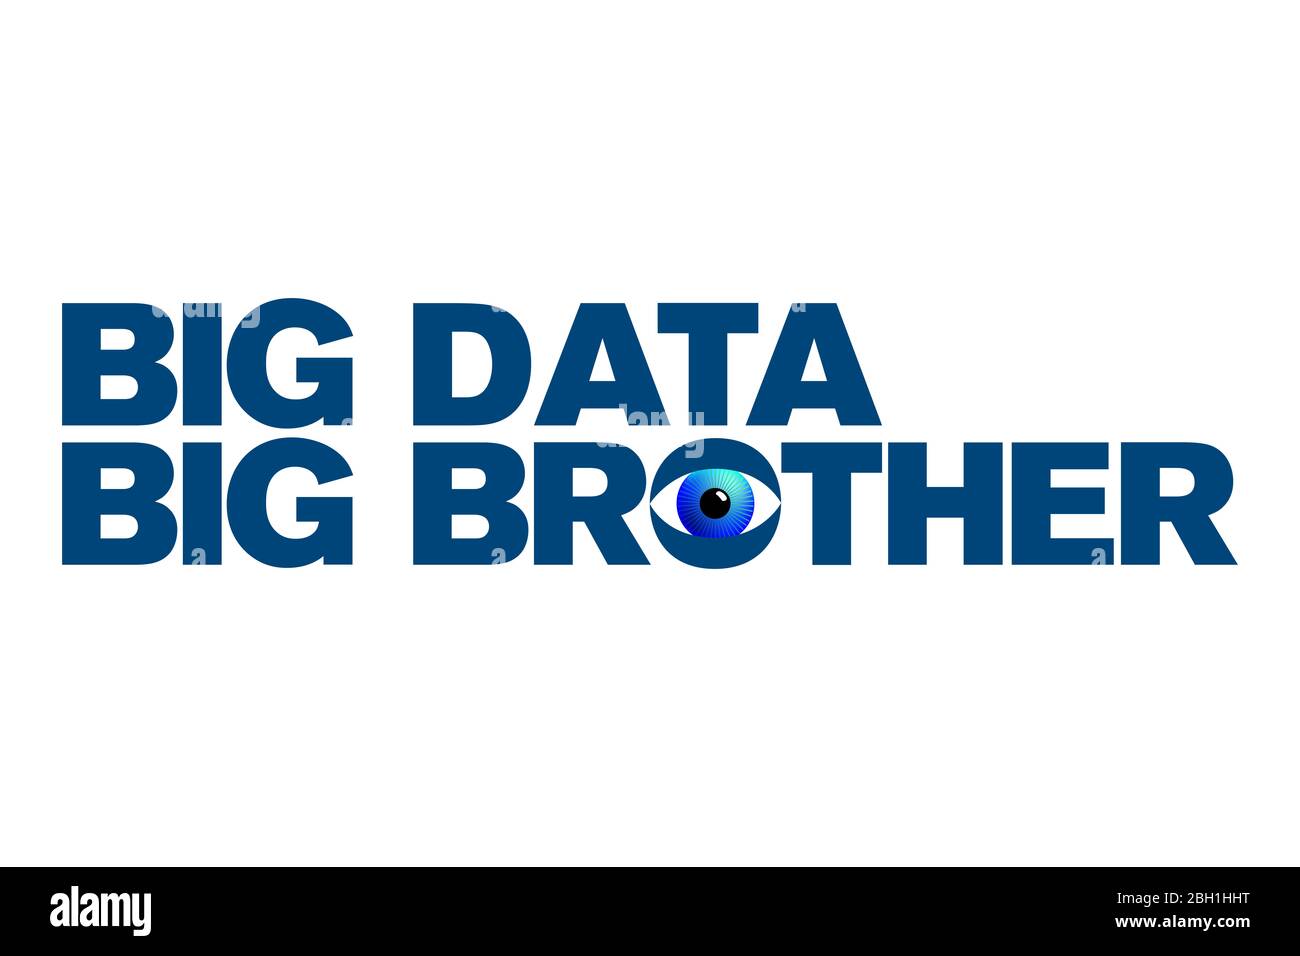 Big Data and Big Brother lettering with a blue surveillance eye. Words shown in bold and blue colored capital letters. Isolated illustration. Stock Photo